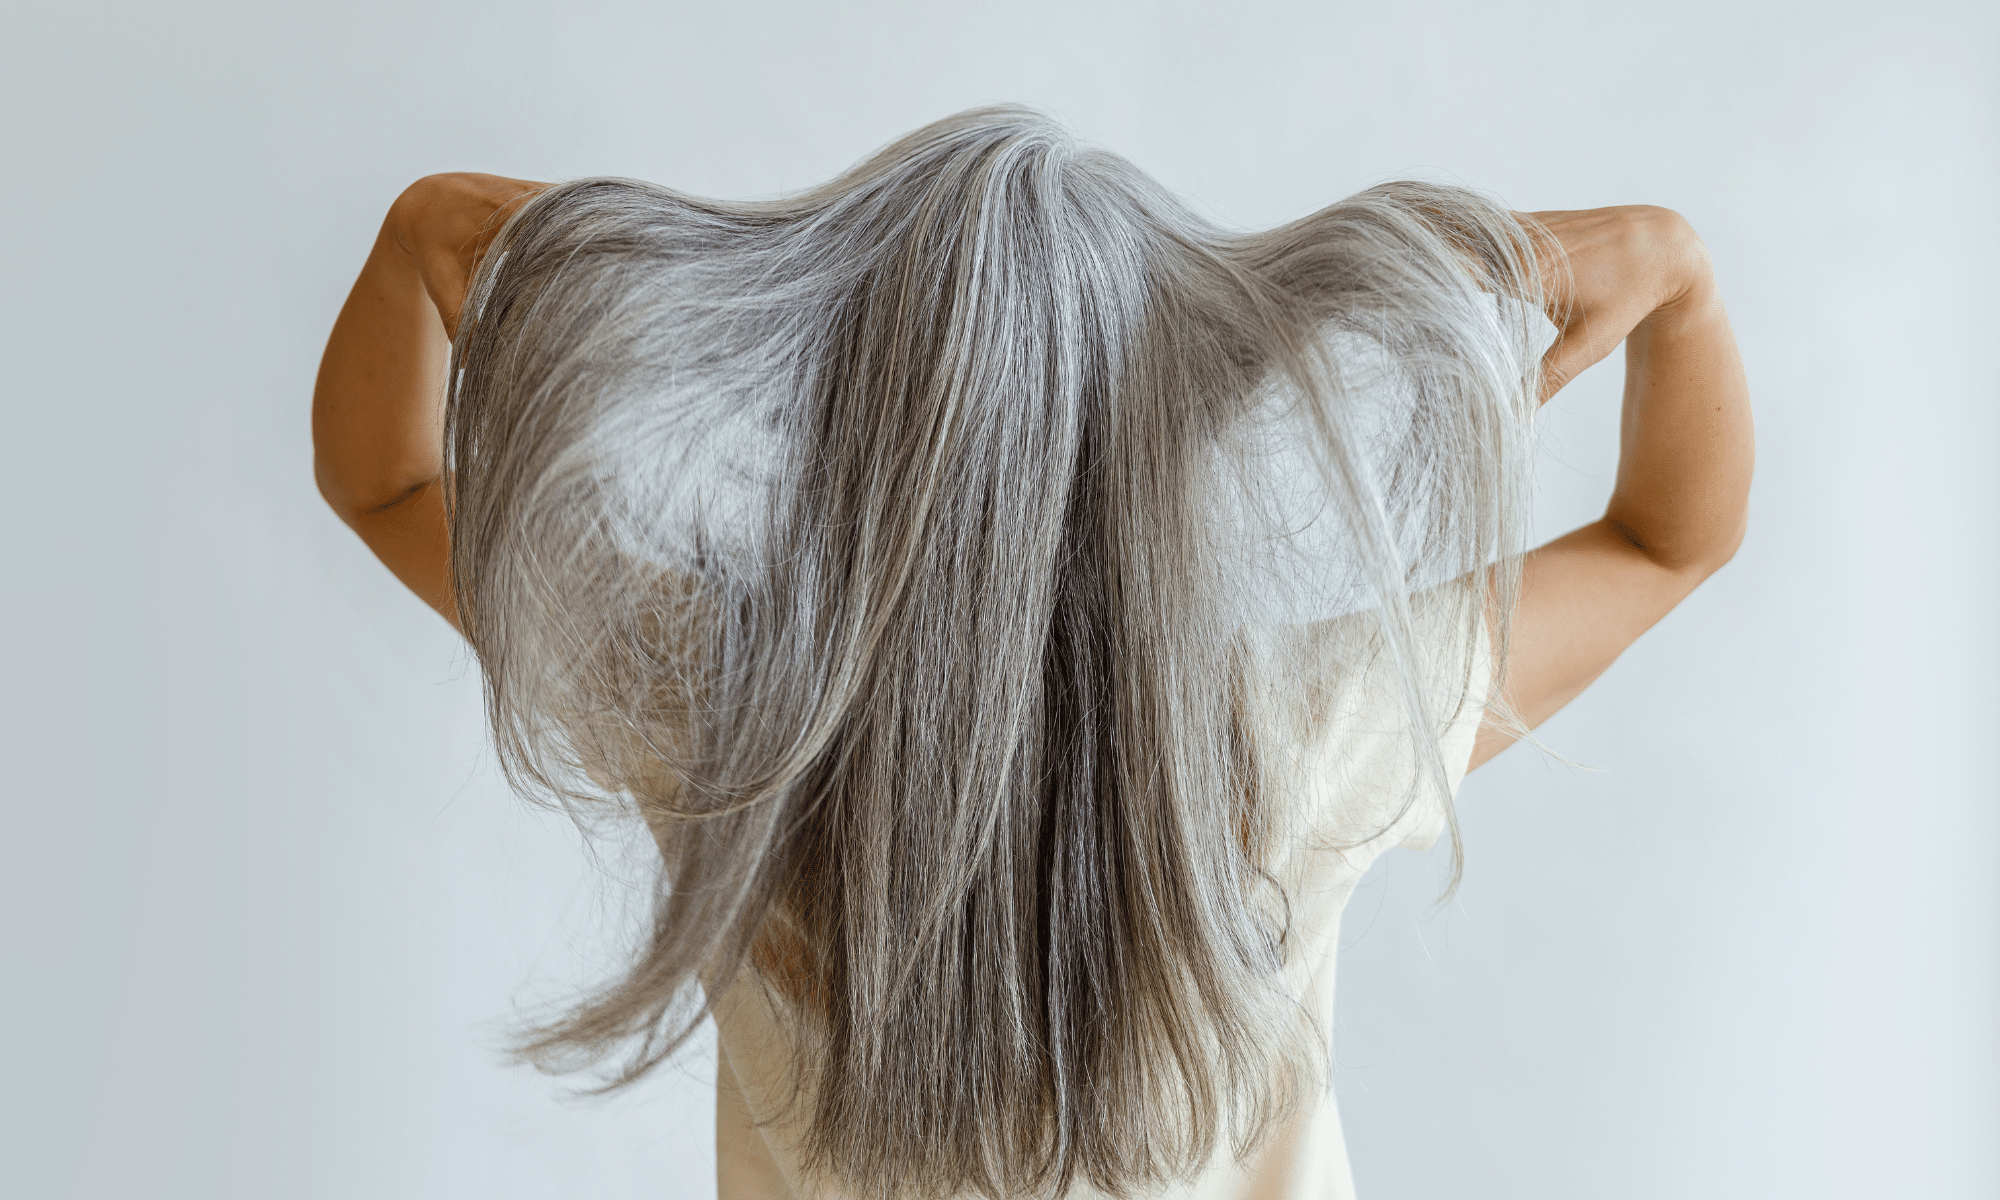 confidant older woman showing off and being proud of her gray hair